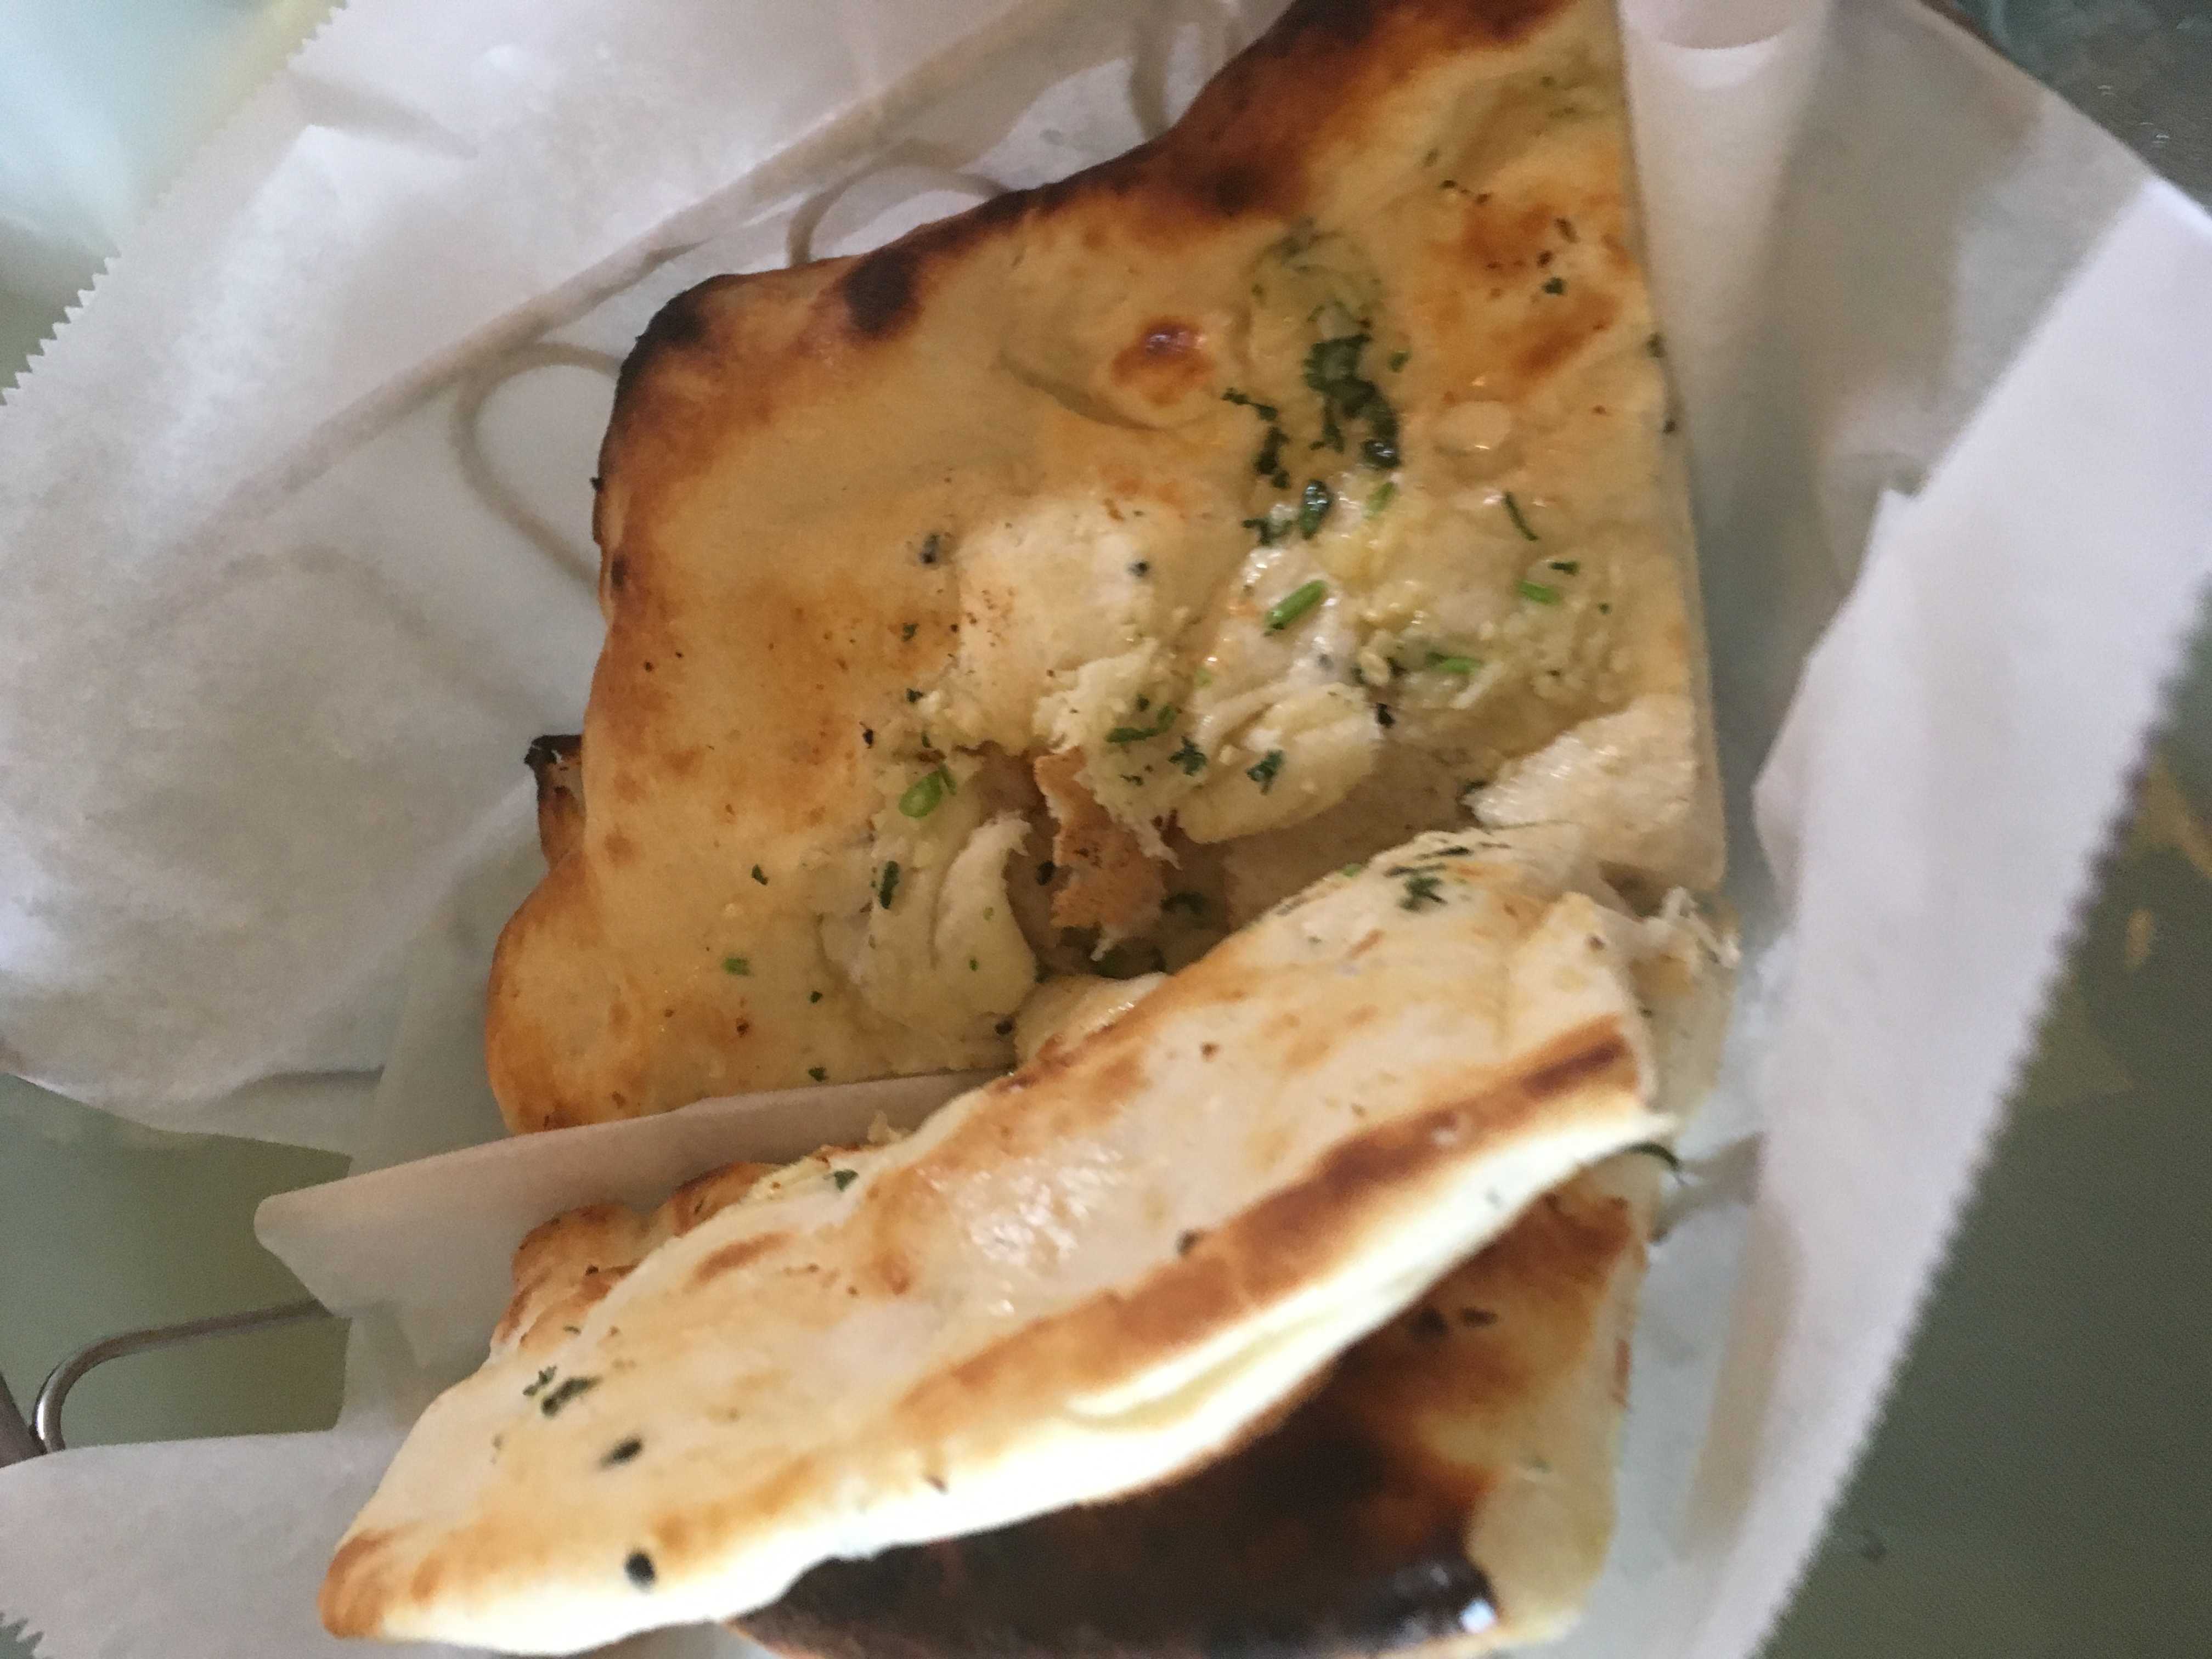 A savory and delicious basket of garlic naan bread from The Taj Cafe. Credit: Elie Bufford / The Foothill Dragon Press